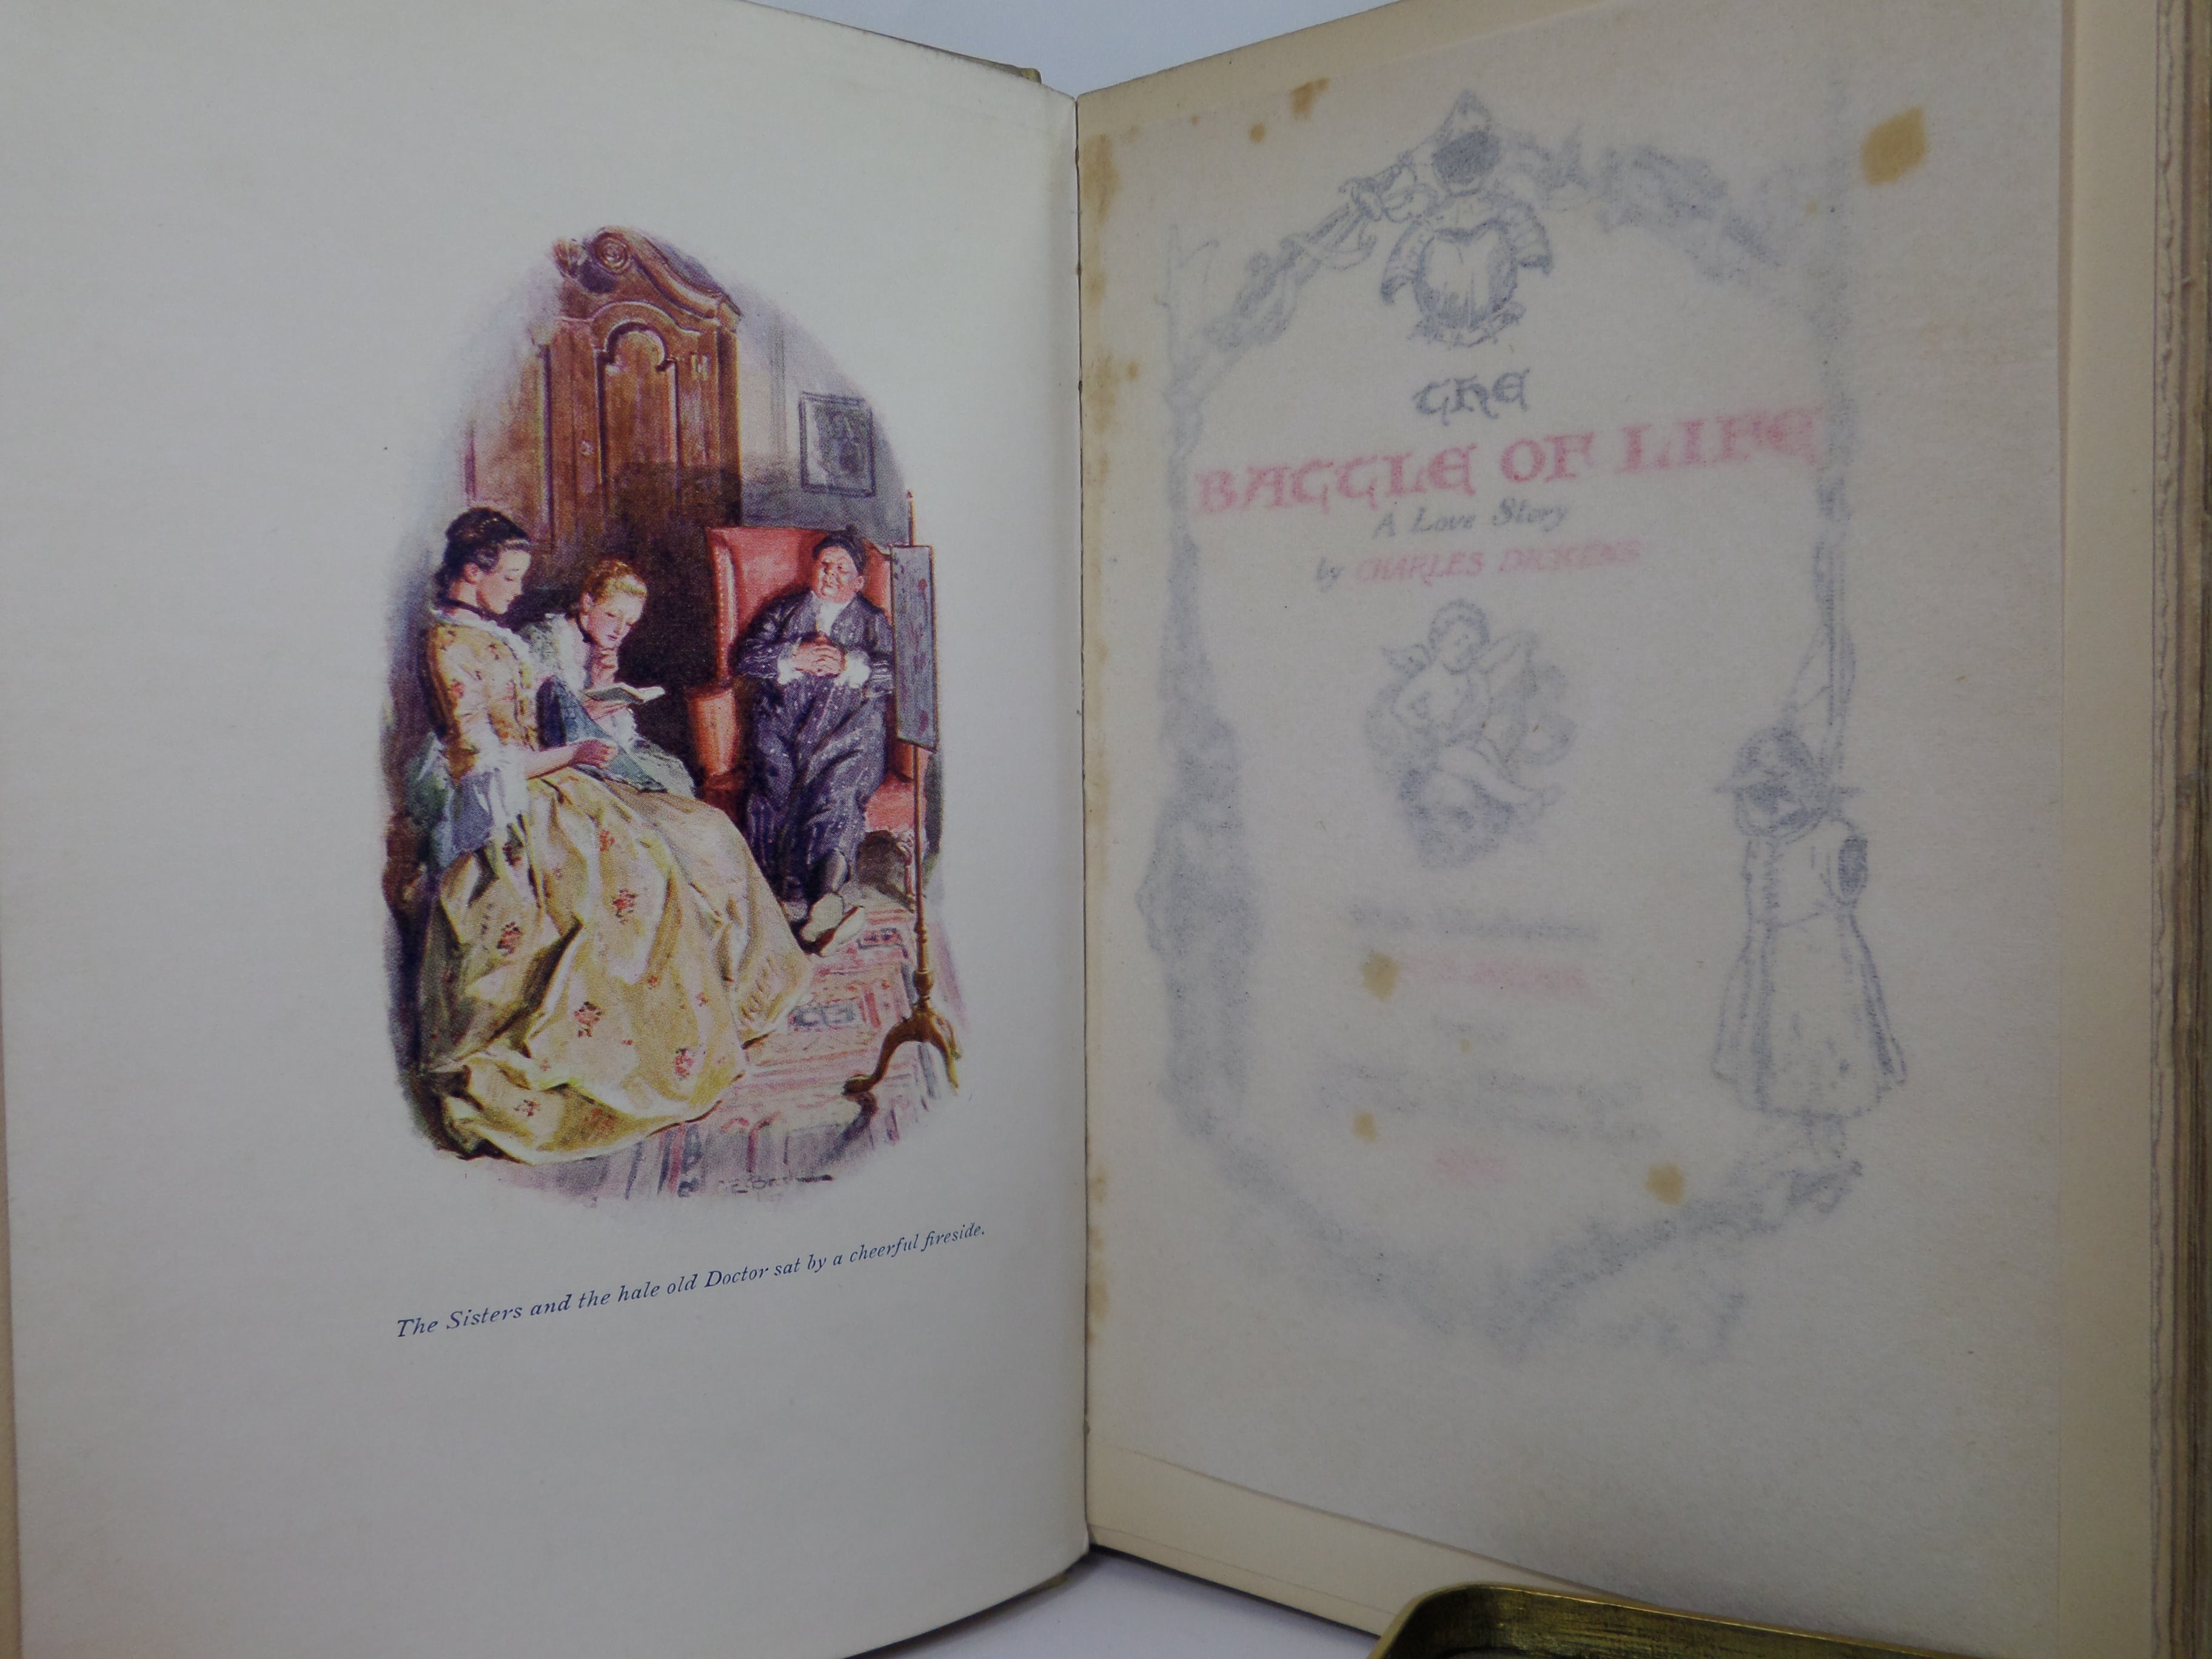 THE BATTLE OF LIFE BY CHARLES DICKENS 1907 DELUXE VELLUM BINDING, C. E. BROCK ILLUSTRATIONS